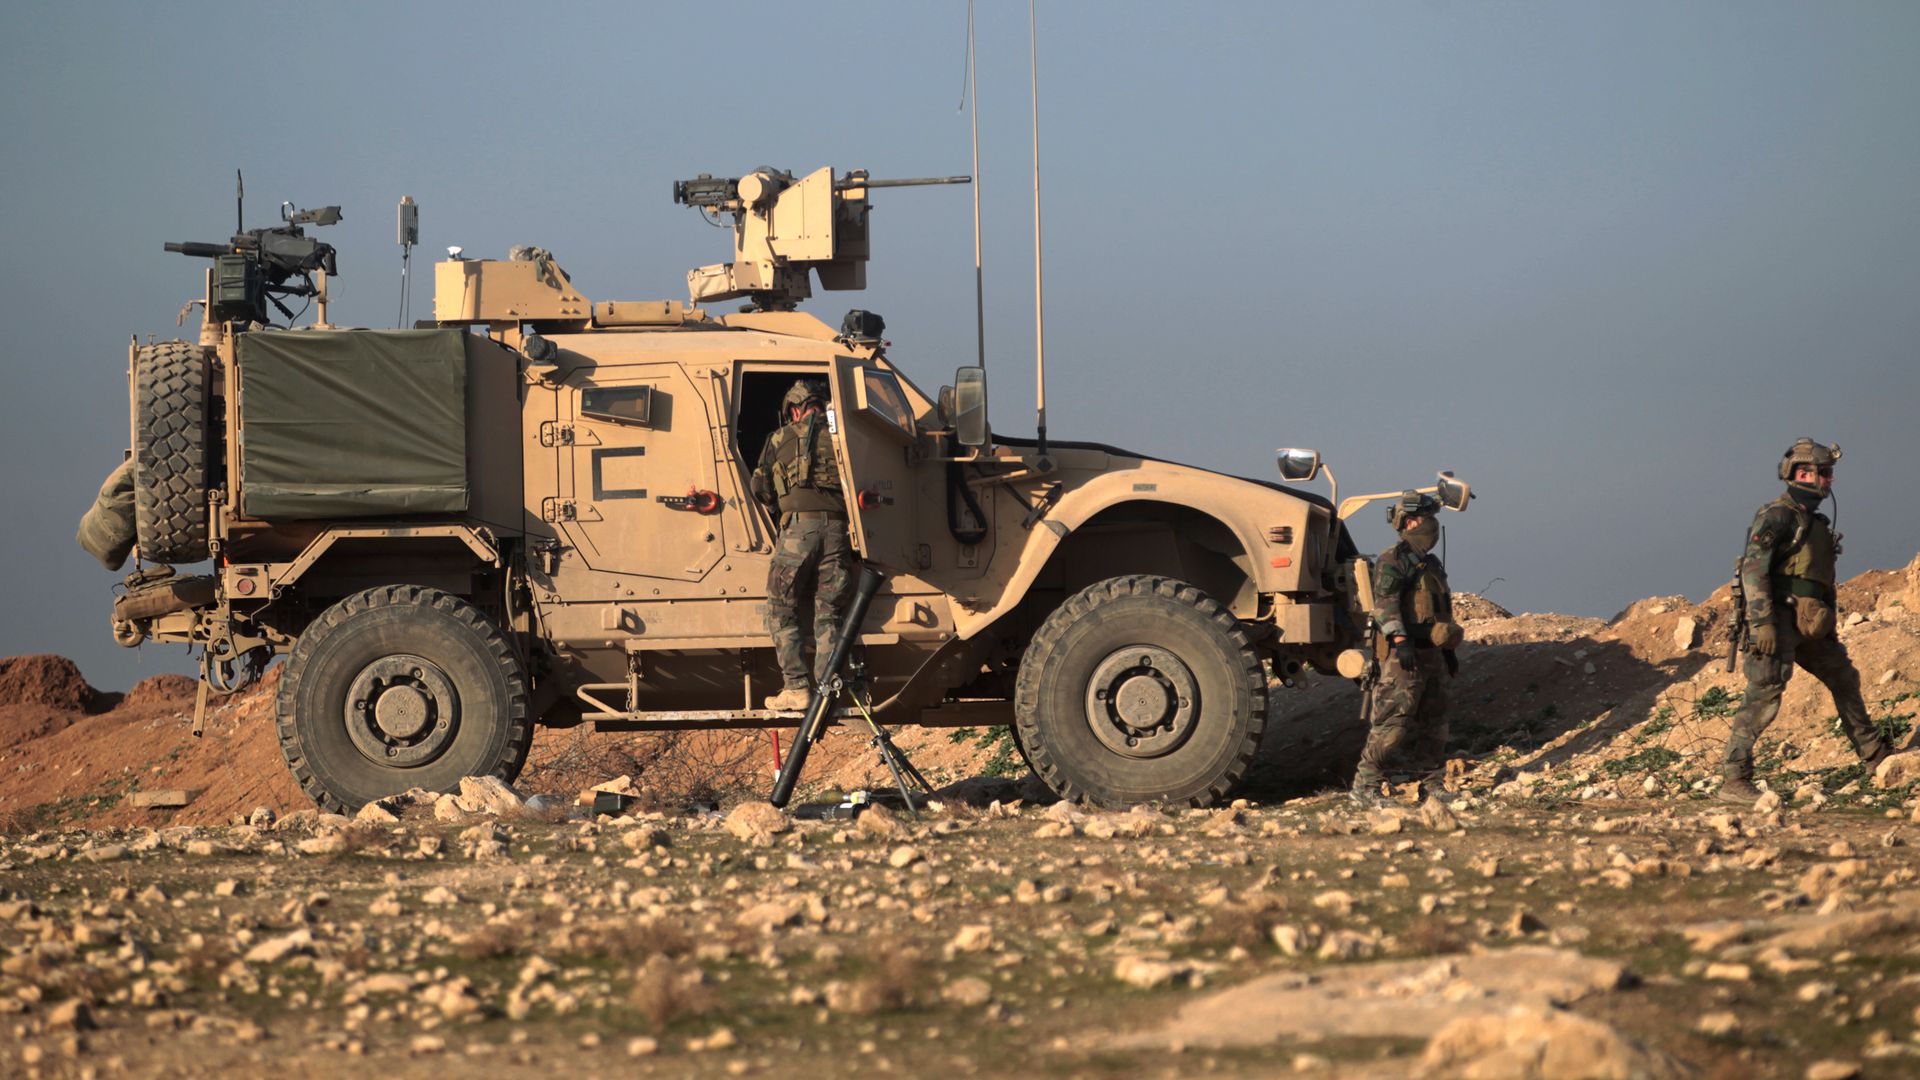 Soldiers get out of an armored vehicle